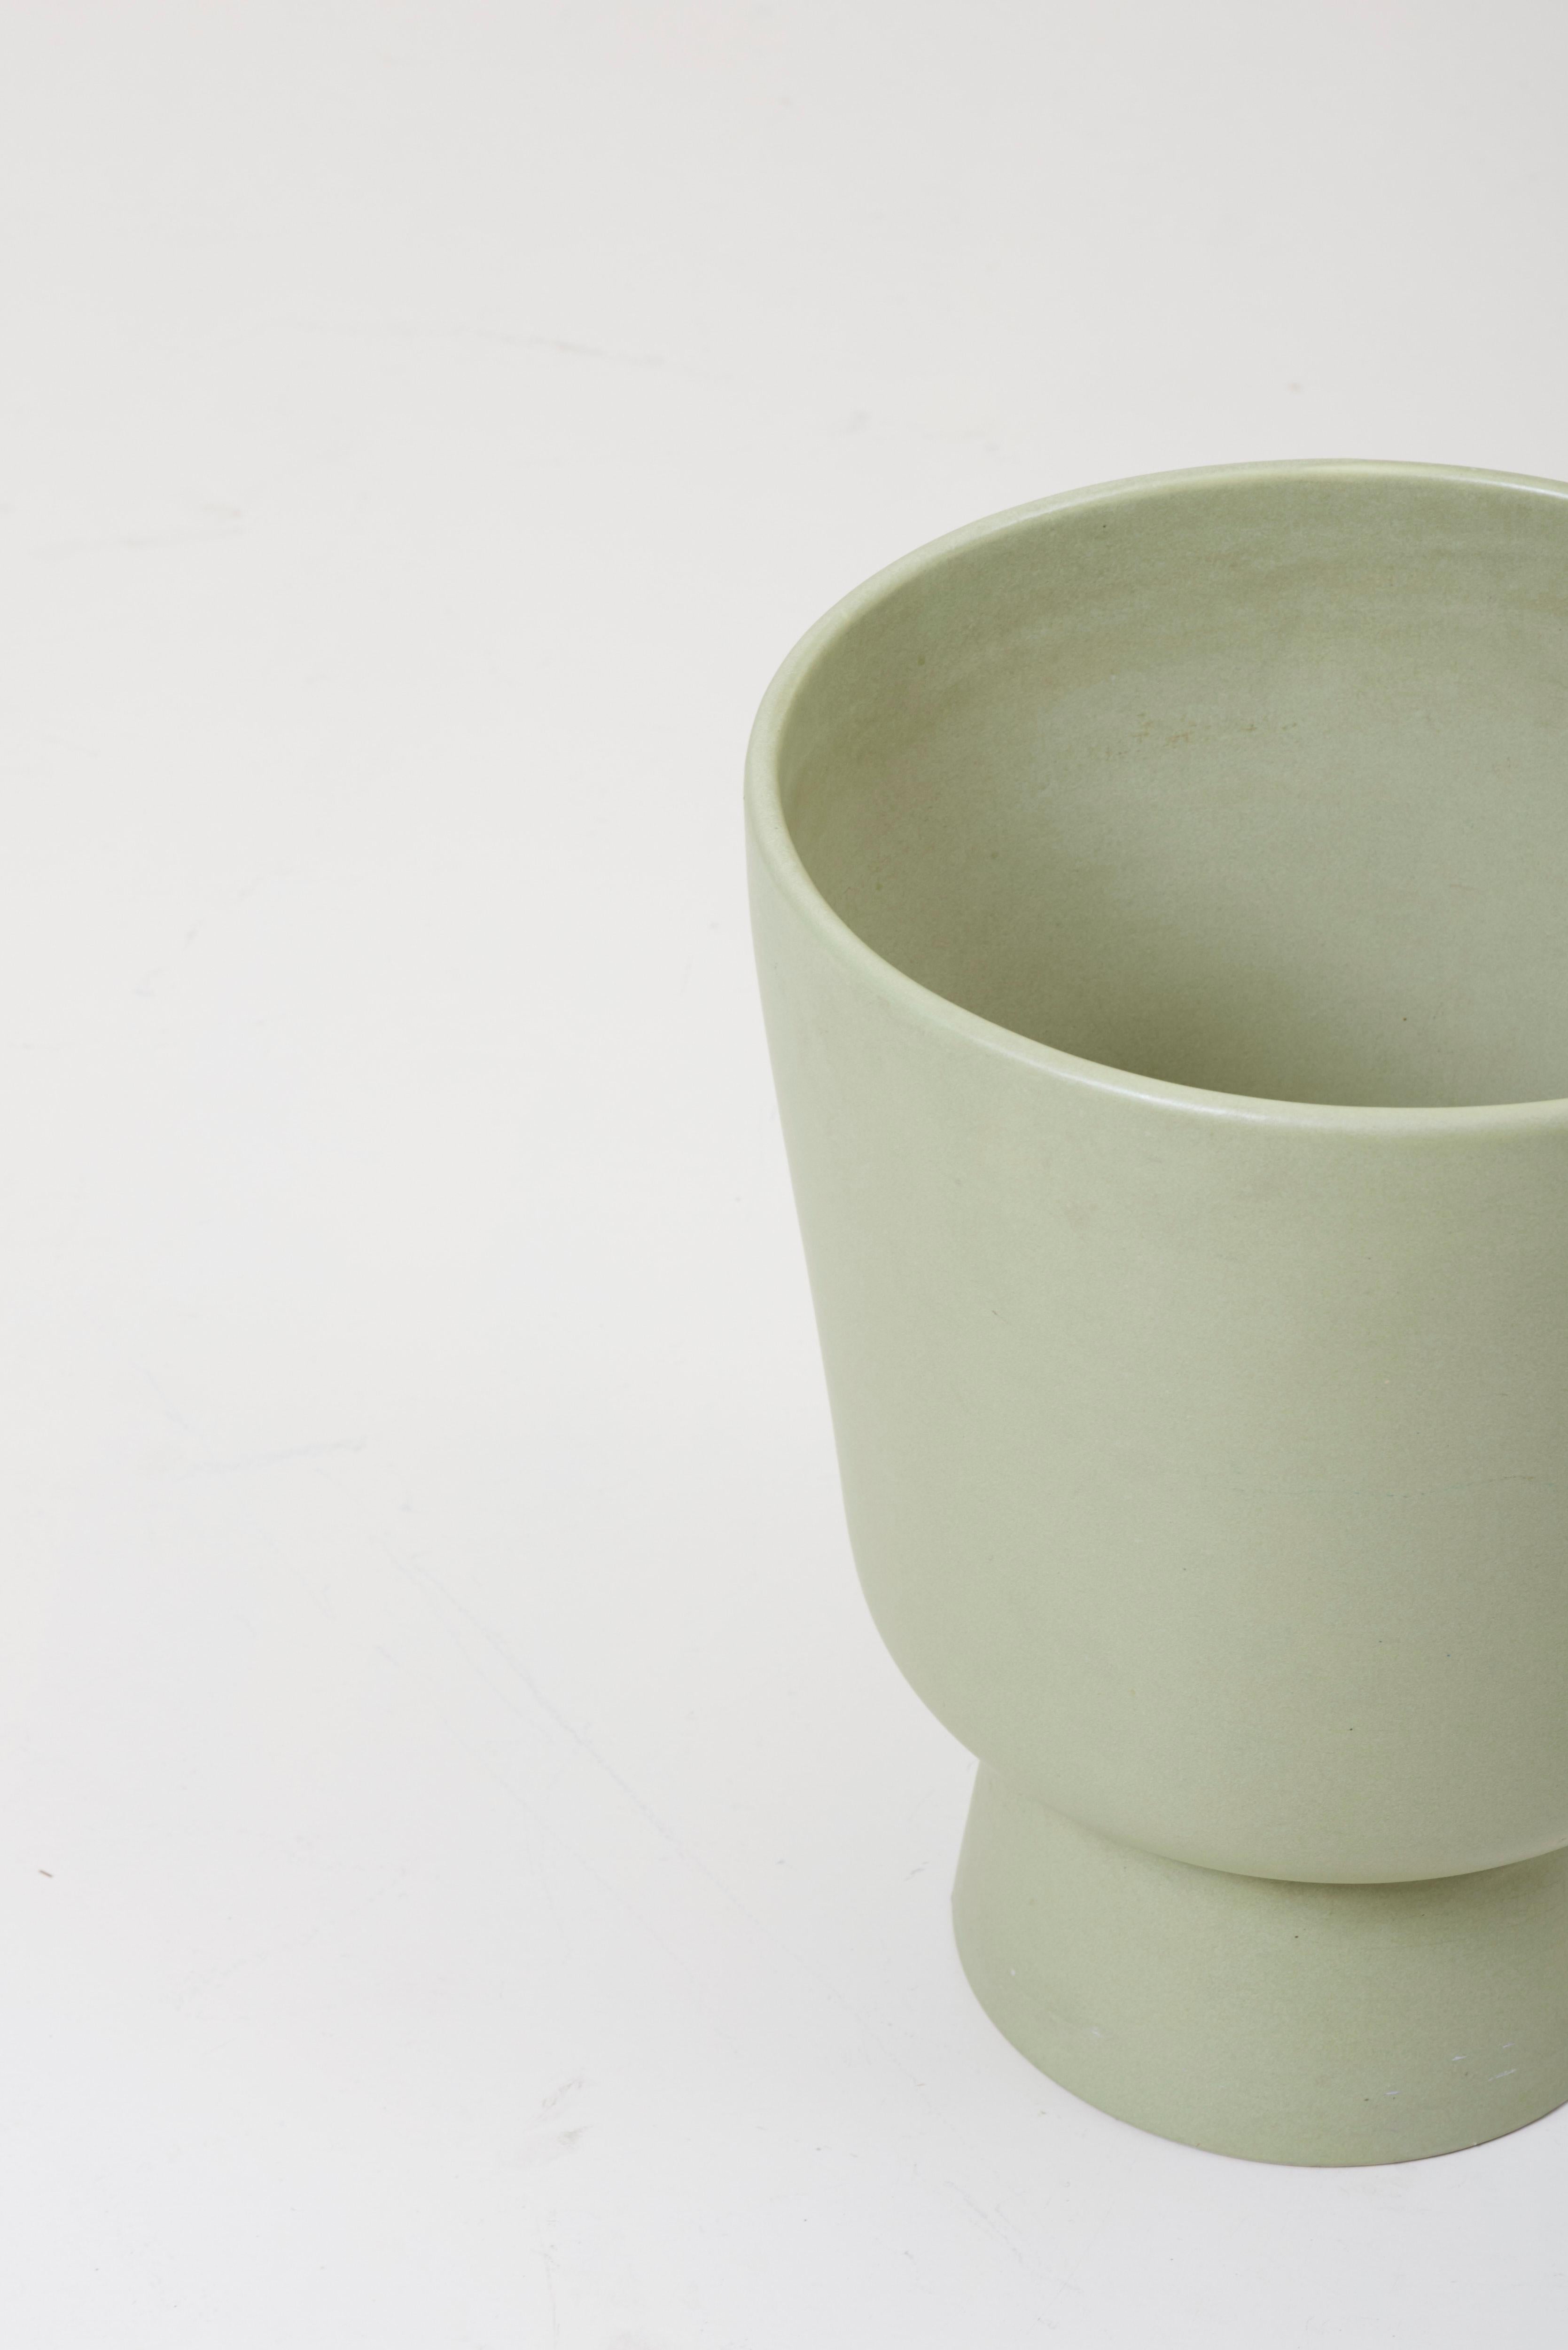 Mid-Century Modern Malcolm Leland Chalice Planter, Architectural Pottery, 1960s For Sale